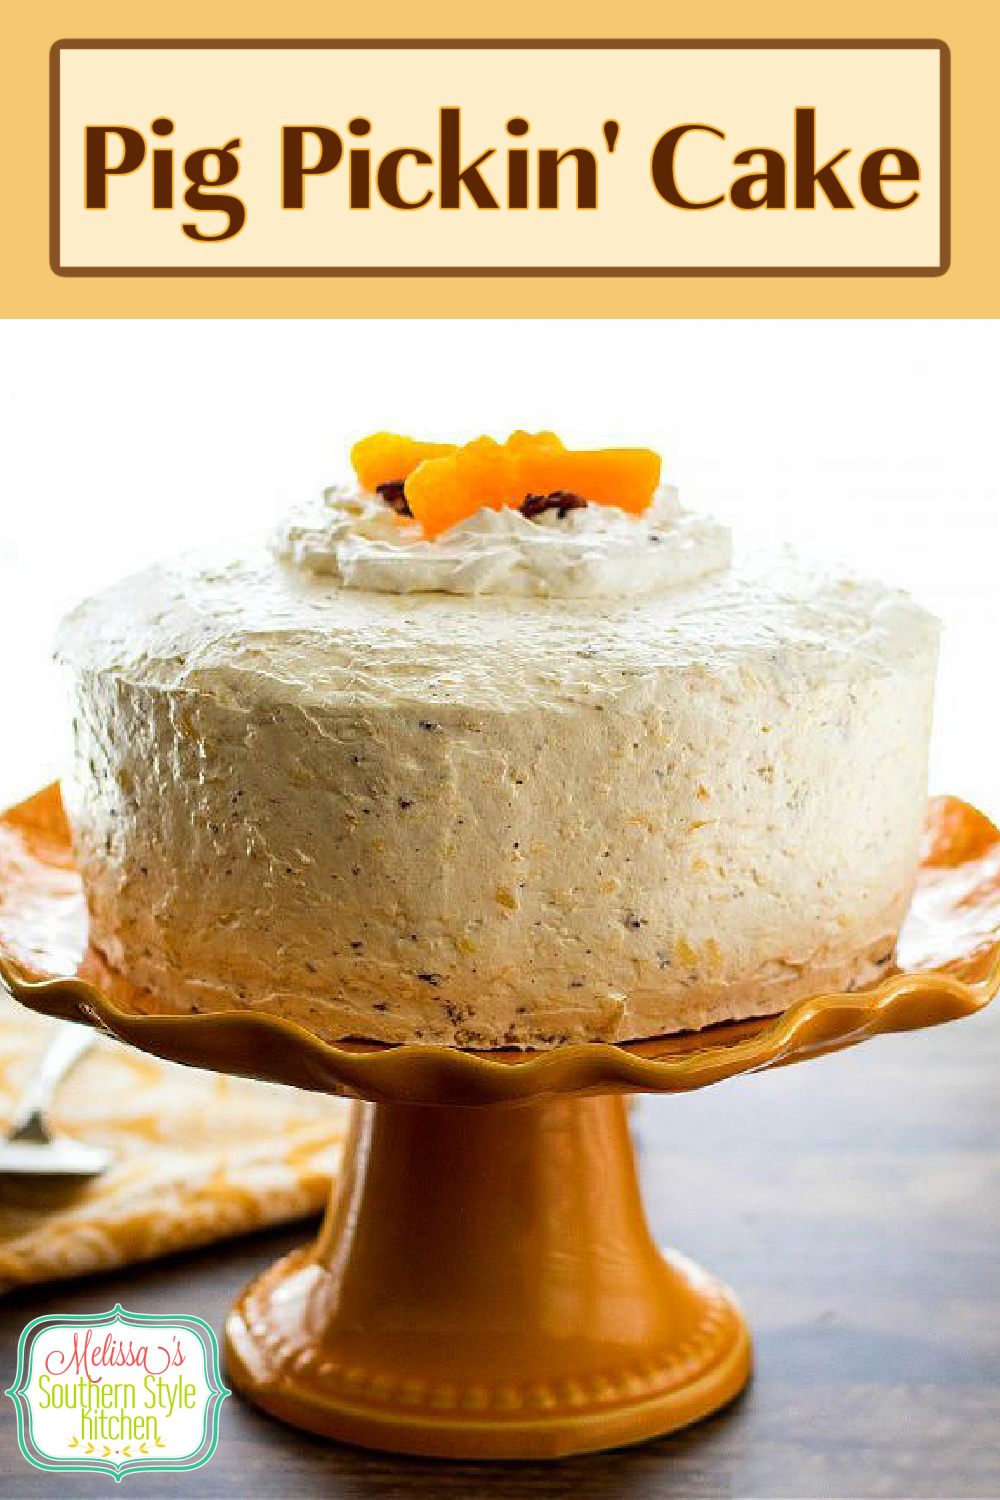 Pig Pickin' Cake is a classic North Carolina dessert featuring mandarin oranges and pineapple. It's often served at picnics, barbecues and for the holidays #pigpickincake #mandarinoranges #orangecakes #cakerecipes #barbecuedesserts #holidayrecipes #desserfts #dessertfoodrecipes #southernfood #southernrecipes